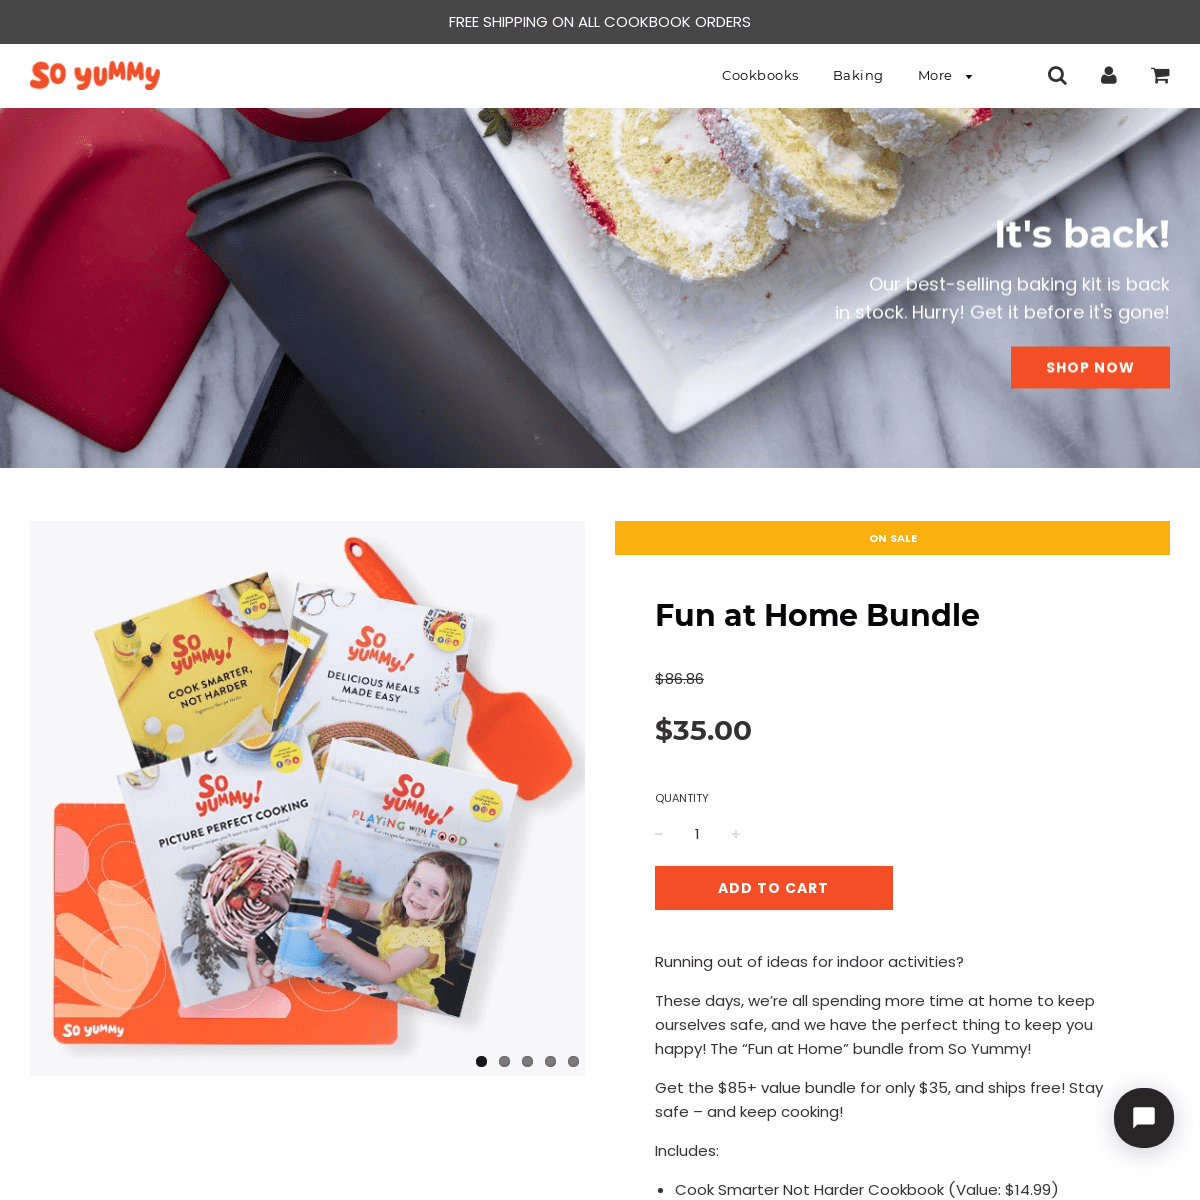 A complete backup of soyummystore.com